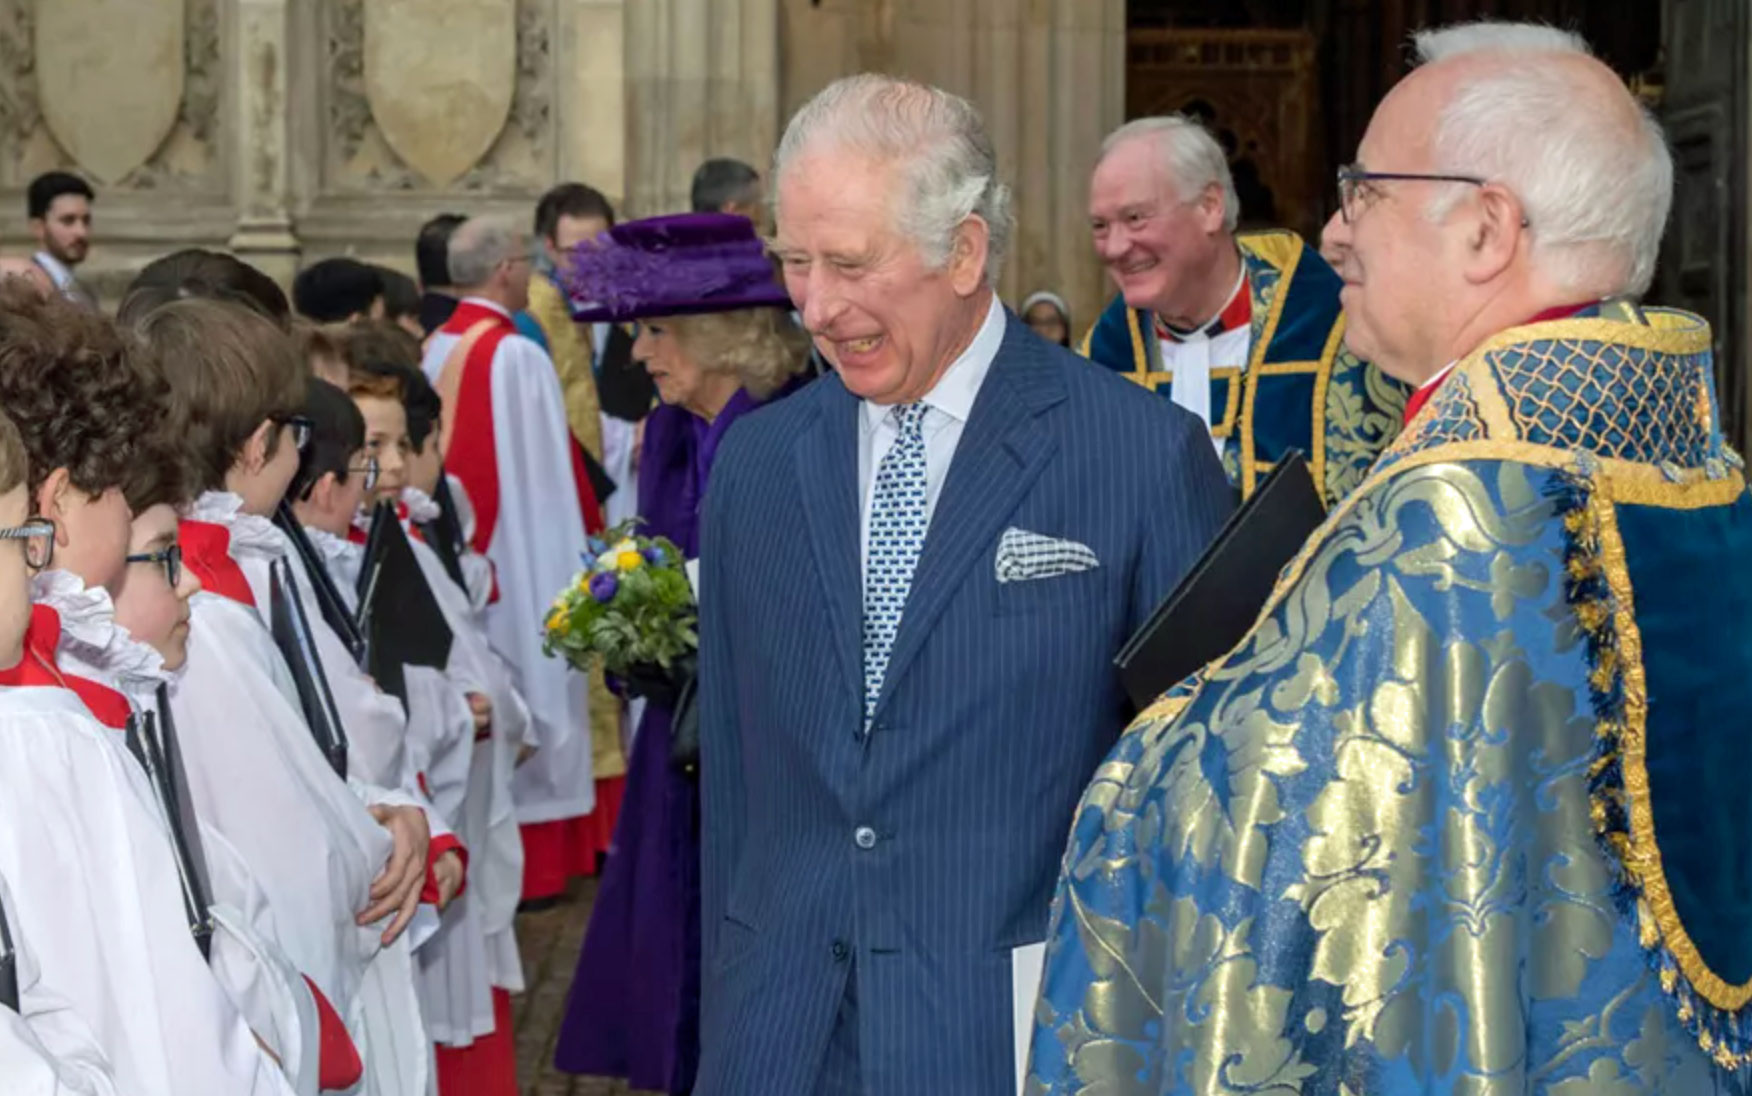 King Charles III (then the Prince of Wales) at the Commonwealth Day service in 2022. (Photo courtesy of Westminster Abbey)